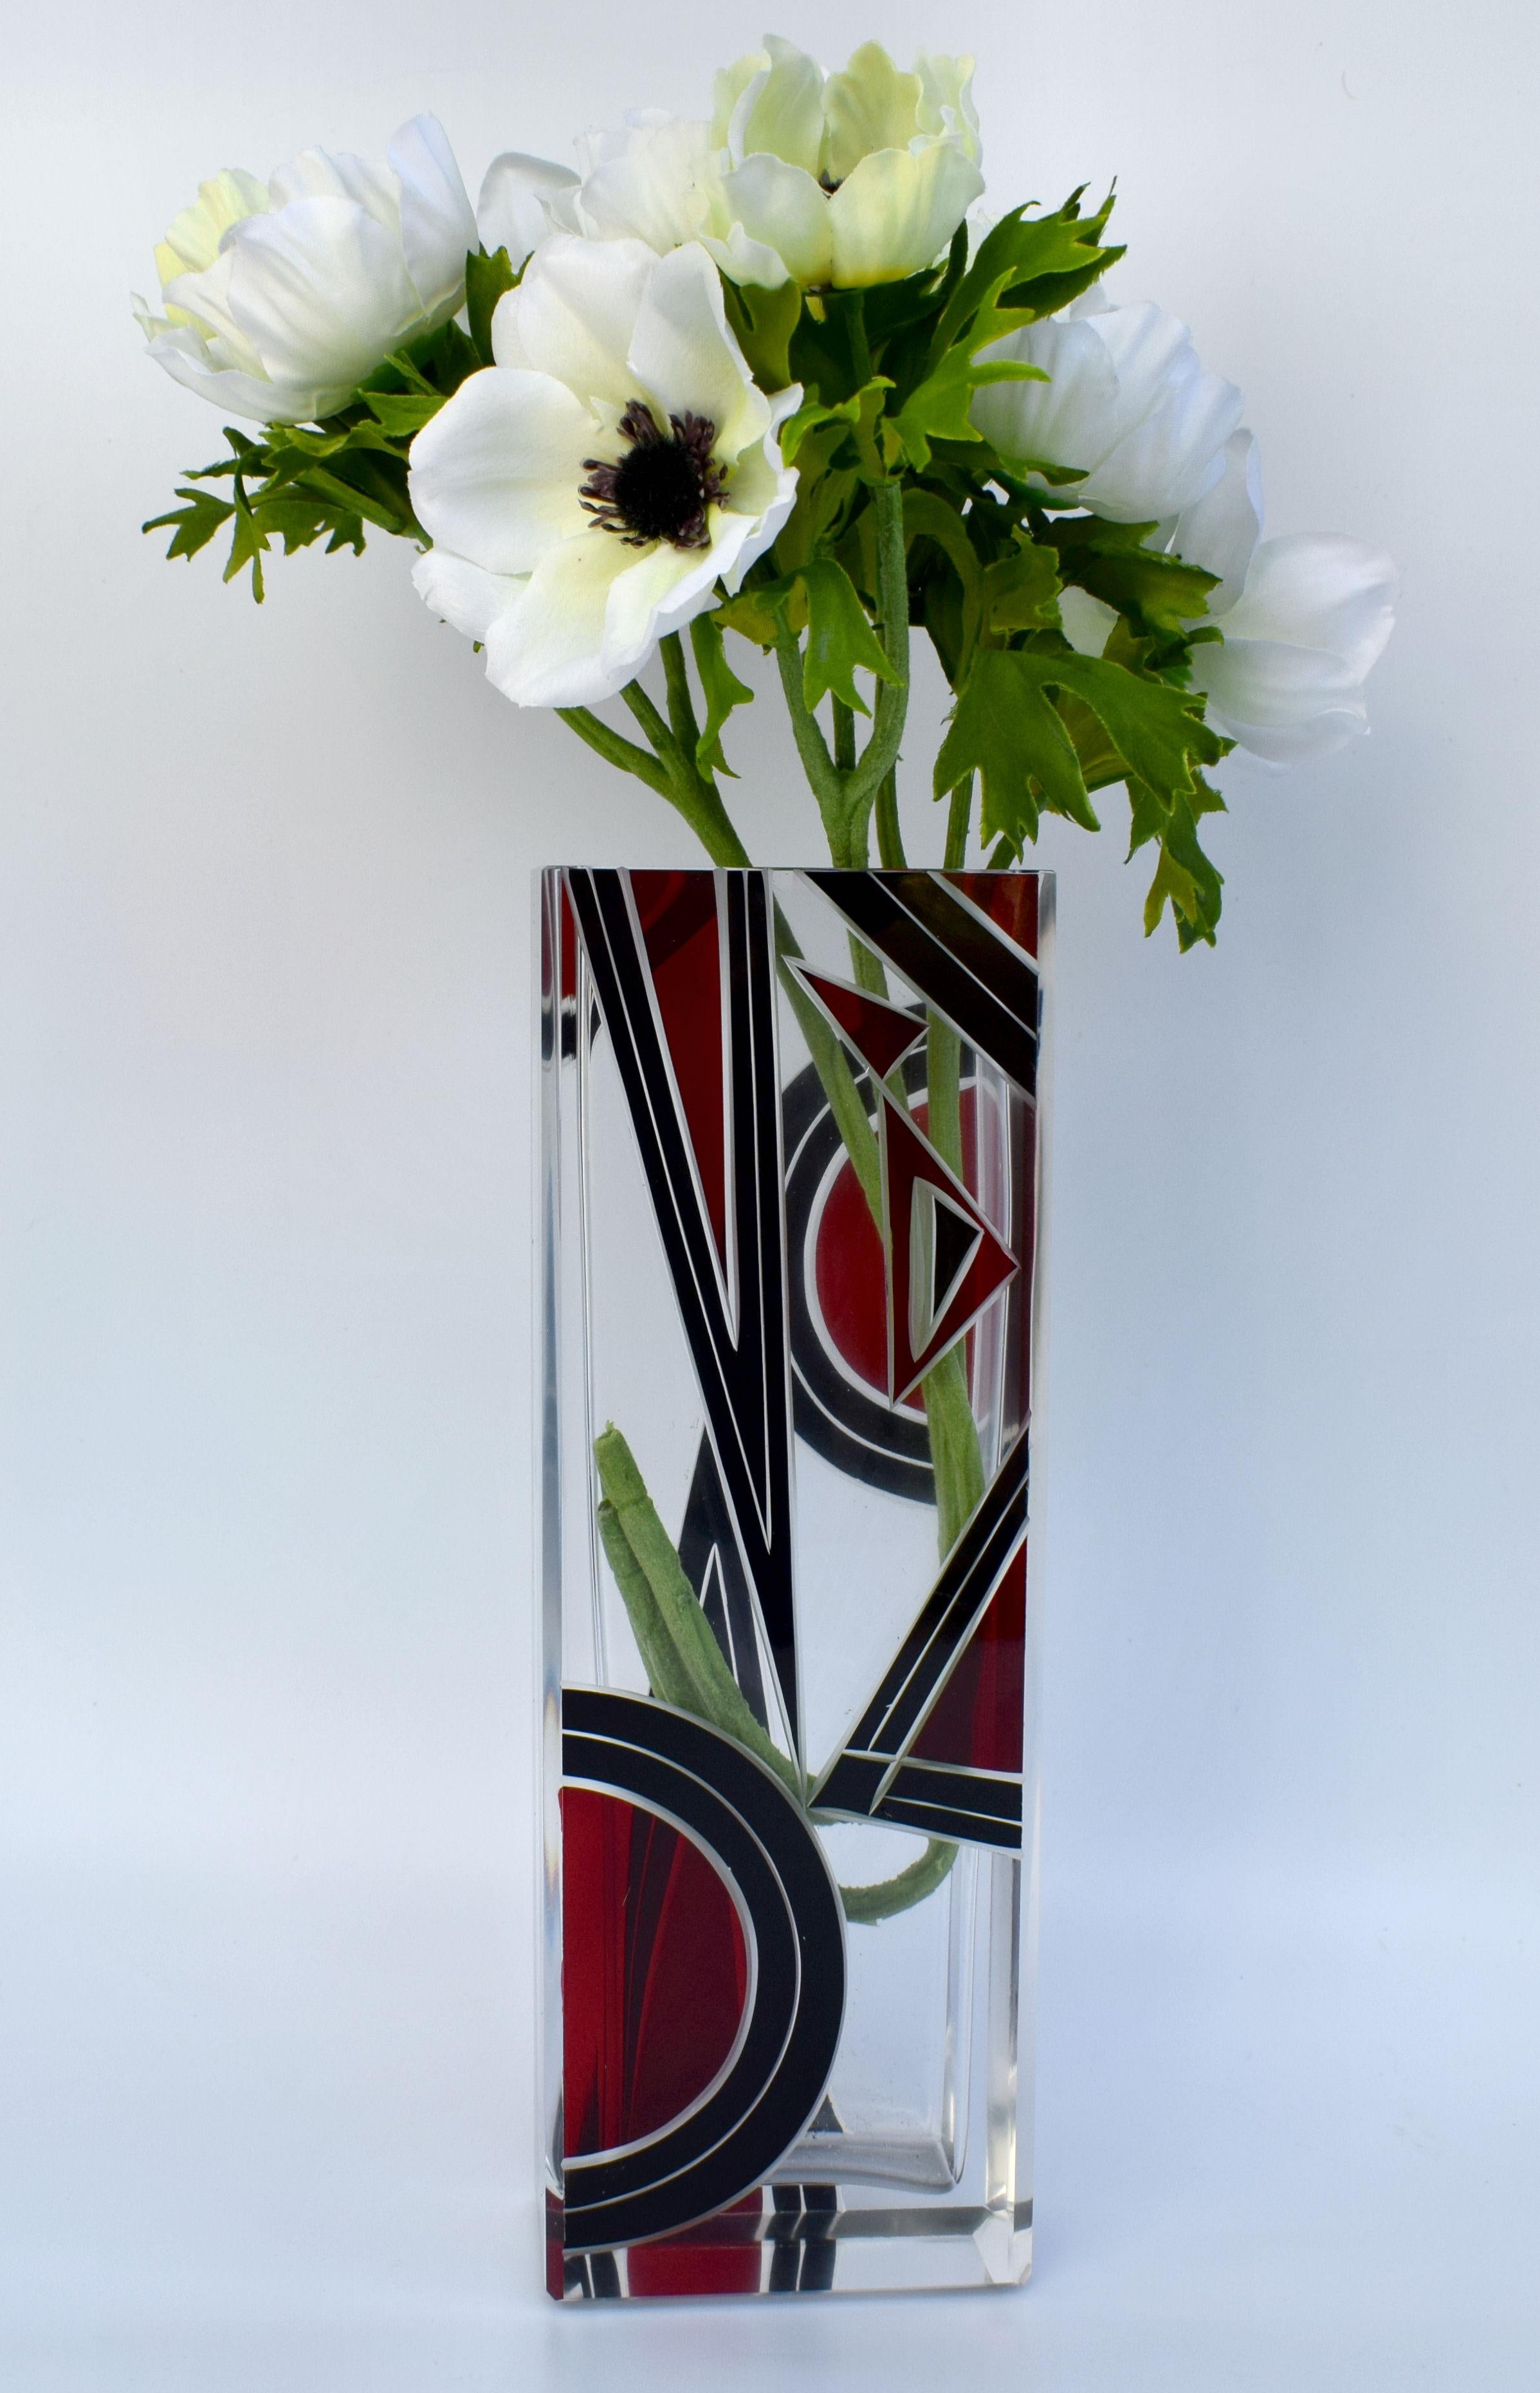 For your consideration is this exceptional 1930s Art Deco glass vase possibly by Karl Palda and what a gem it is. It really does pack a punch being very tall and elegant and with the most glorious geometric decoration. Heavy quality crystal with no